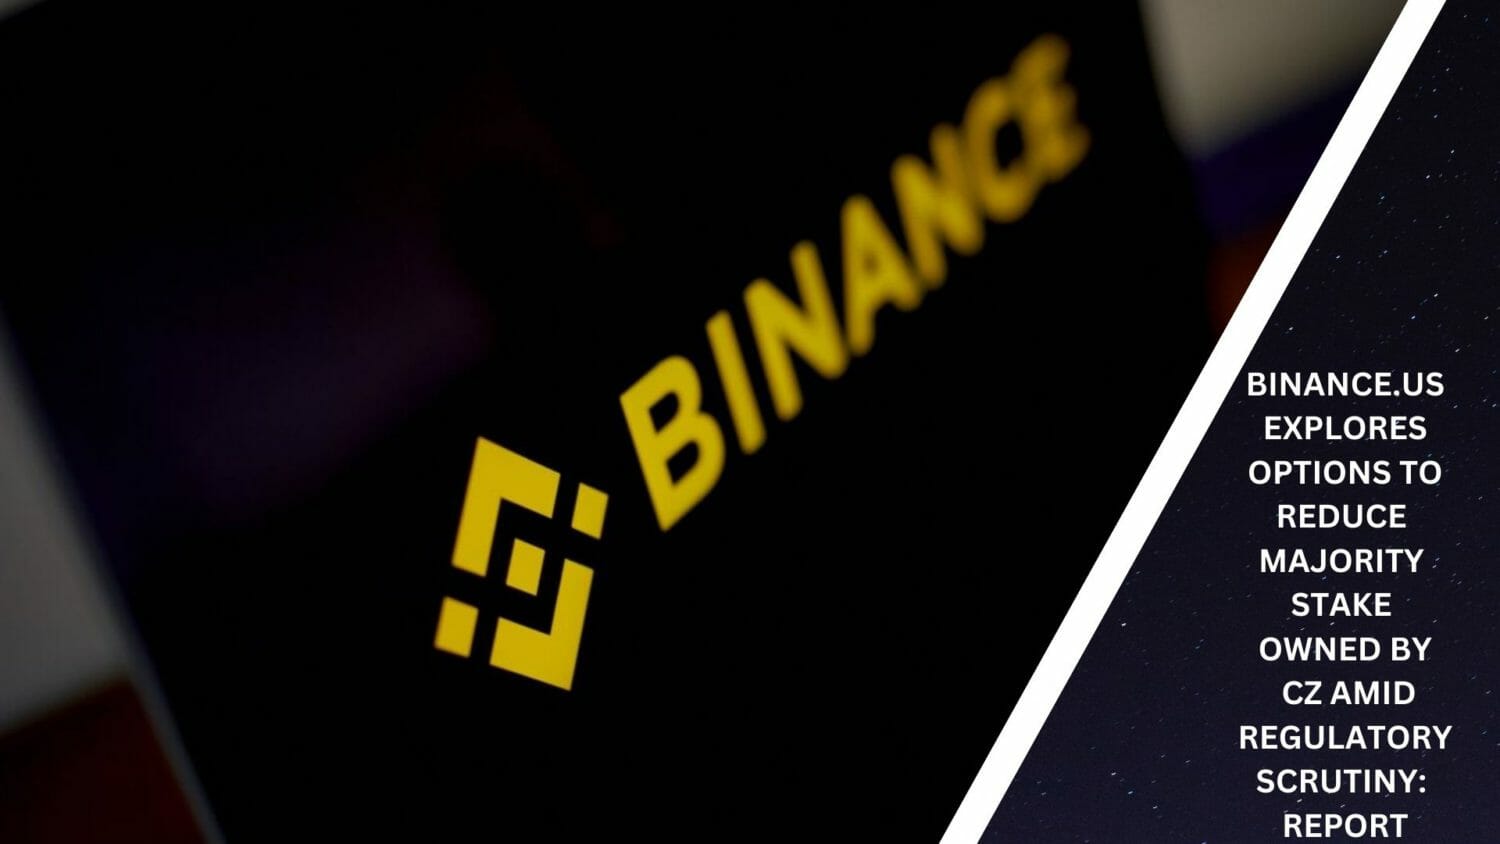 Binance.us Explores Options To Reduce Majority Stake Owned By Cz Amid Regulatory Scrutiny: Report